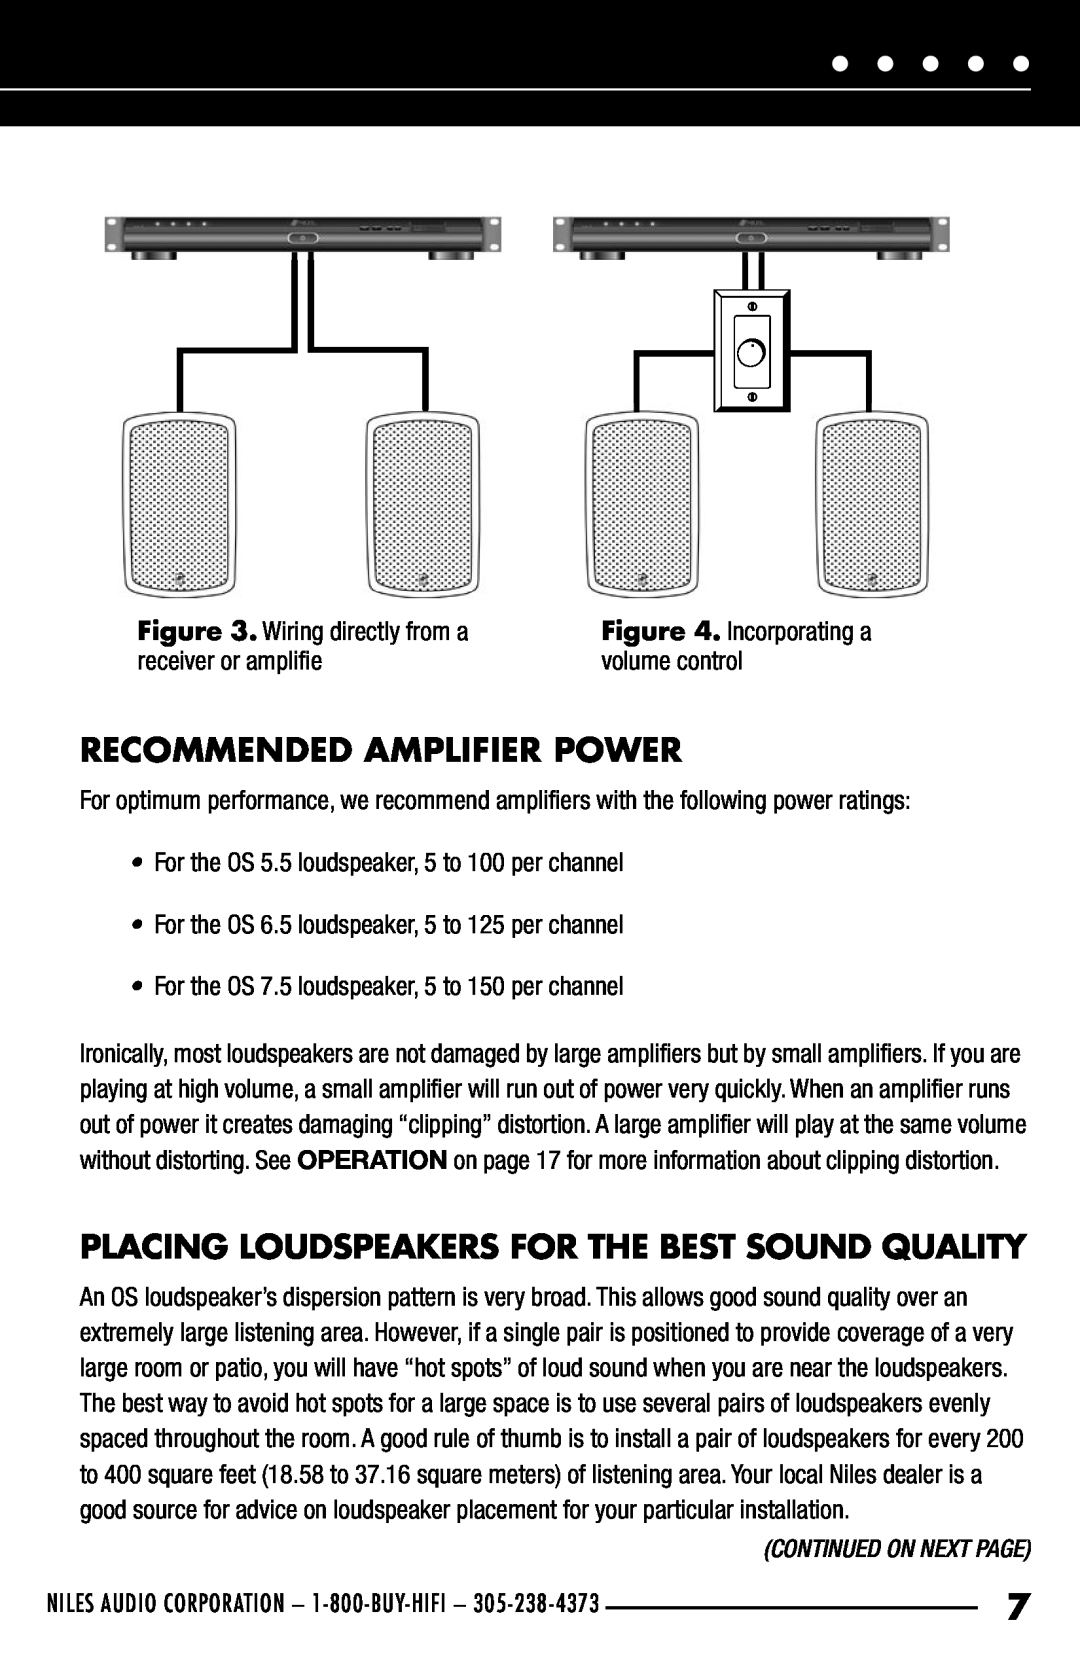 Niles Audio OS5.5 Recommended Amplifier Power, Placing Loudspeakers For The Best Sound Quality, Wiring directly from a 